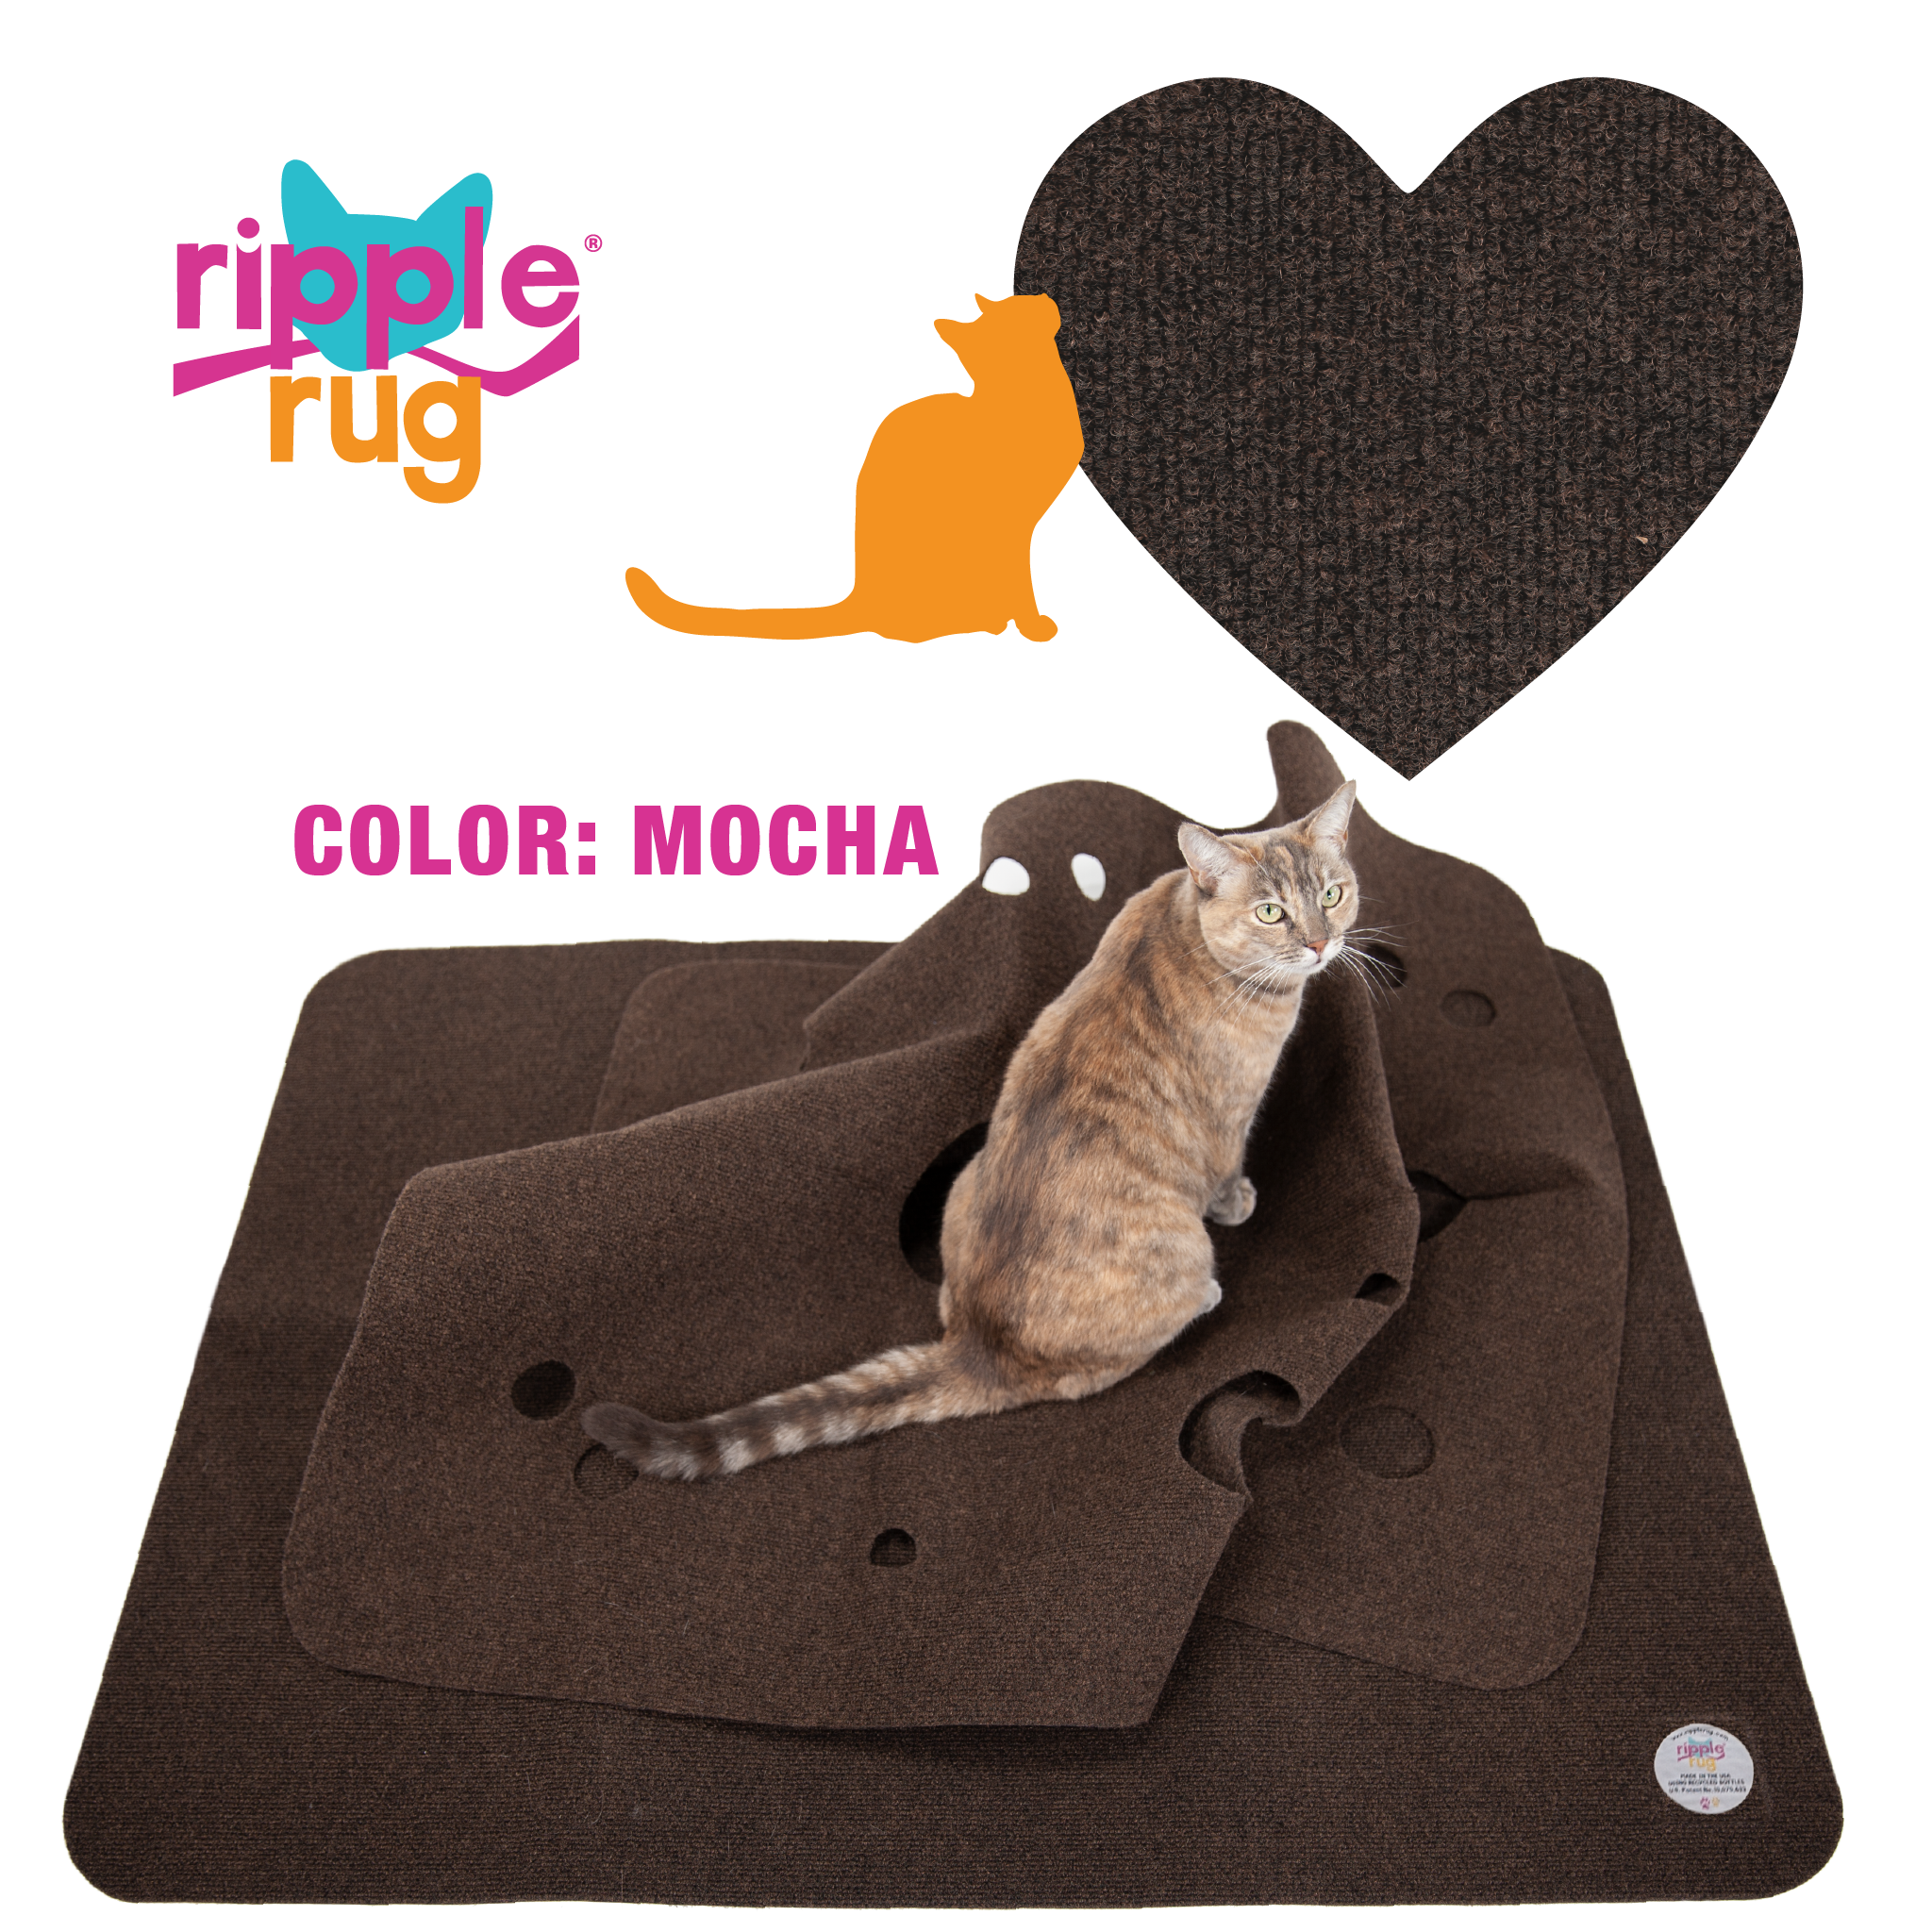 The Ripple Rug Cat Activity Play Mat Fun Interactive Play Training  Scratching Thermal Bed Mat Wbb17370 - China Rug and Pet Rug price